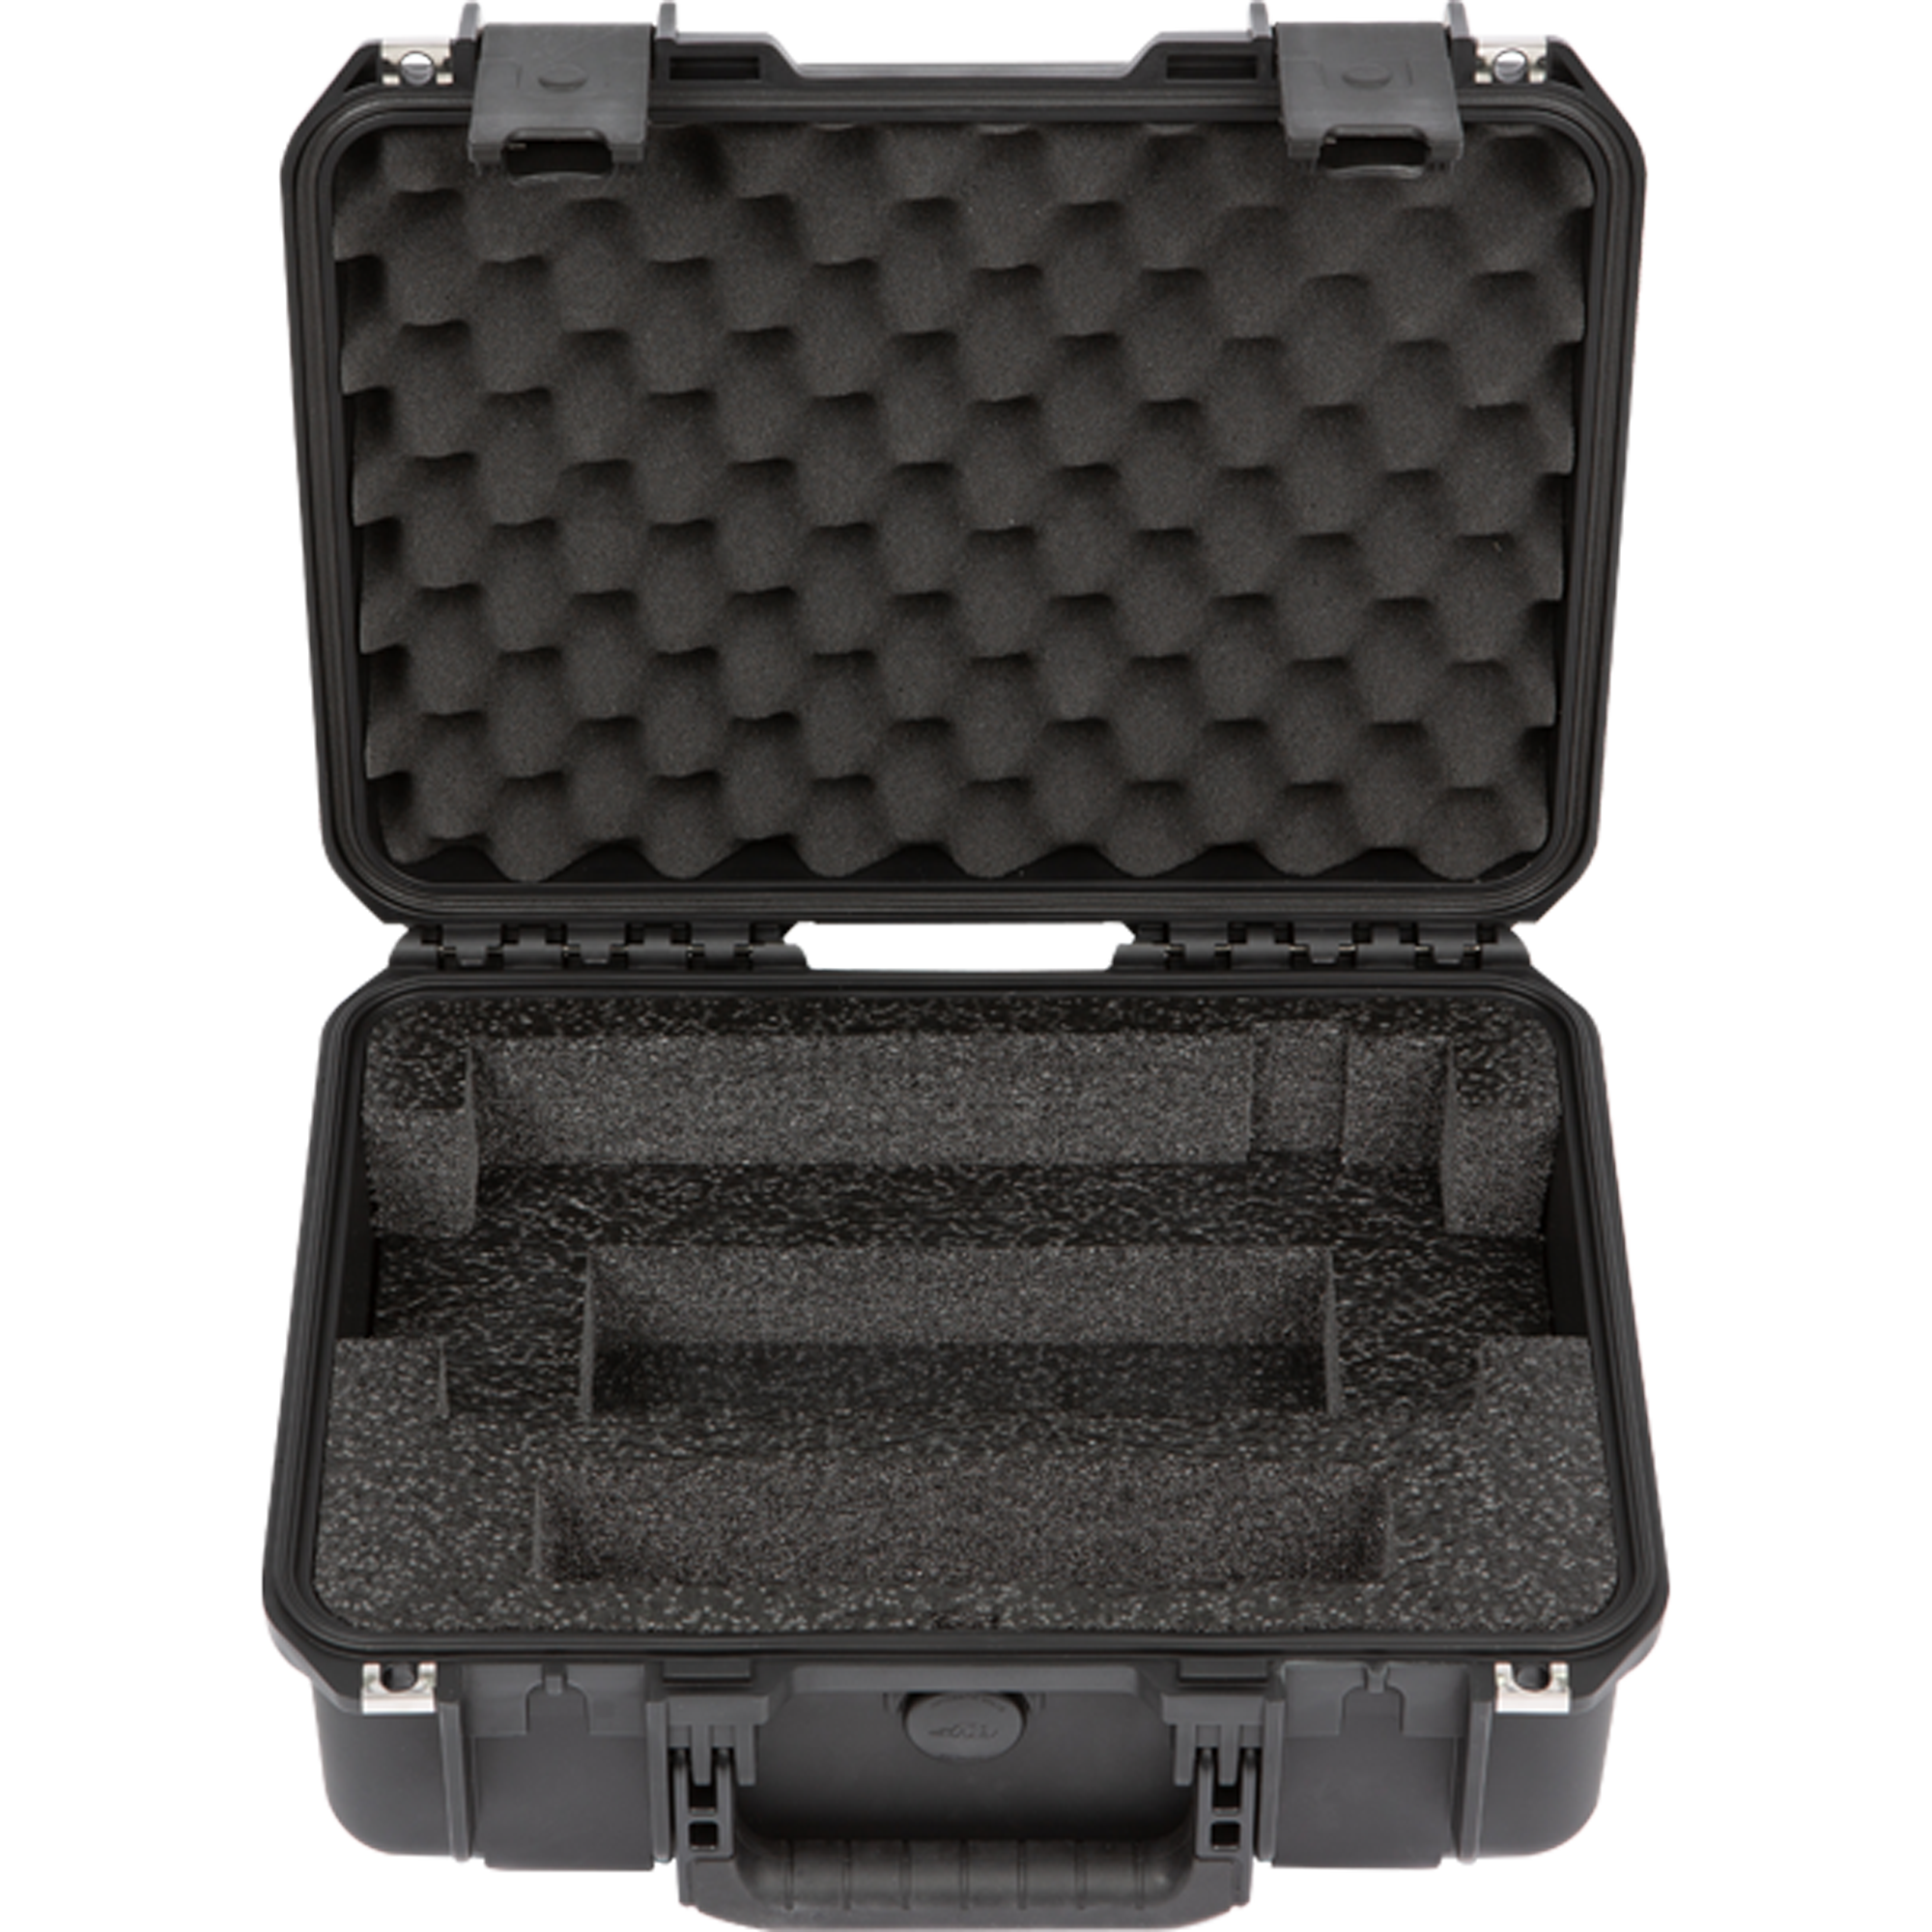 BYFP ipCase for Roland VR-1HD